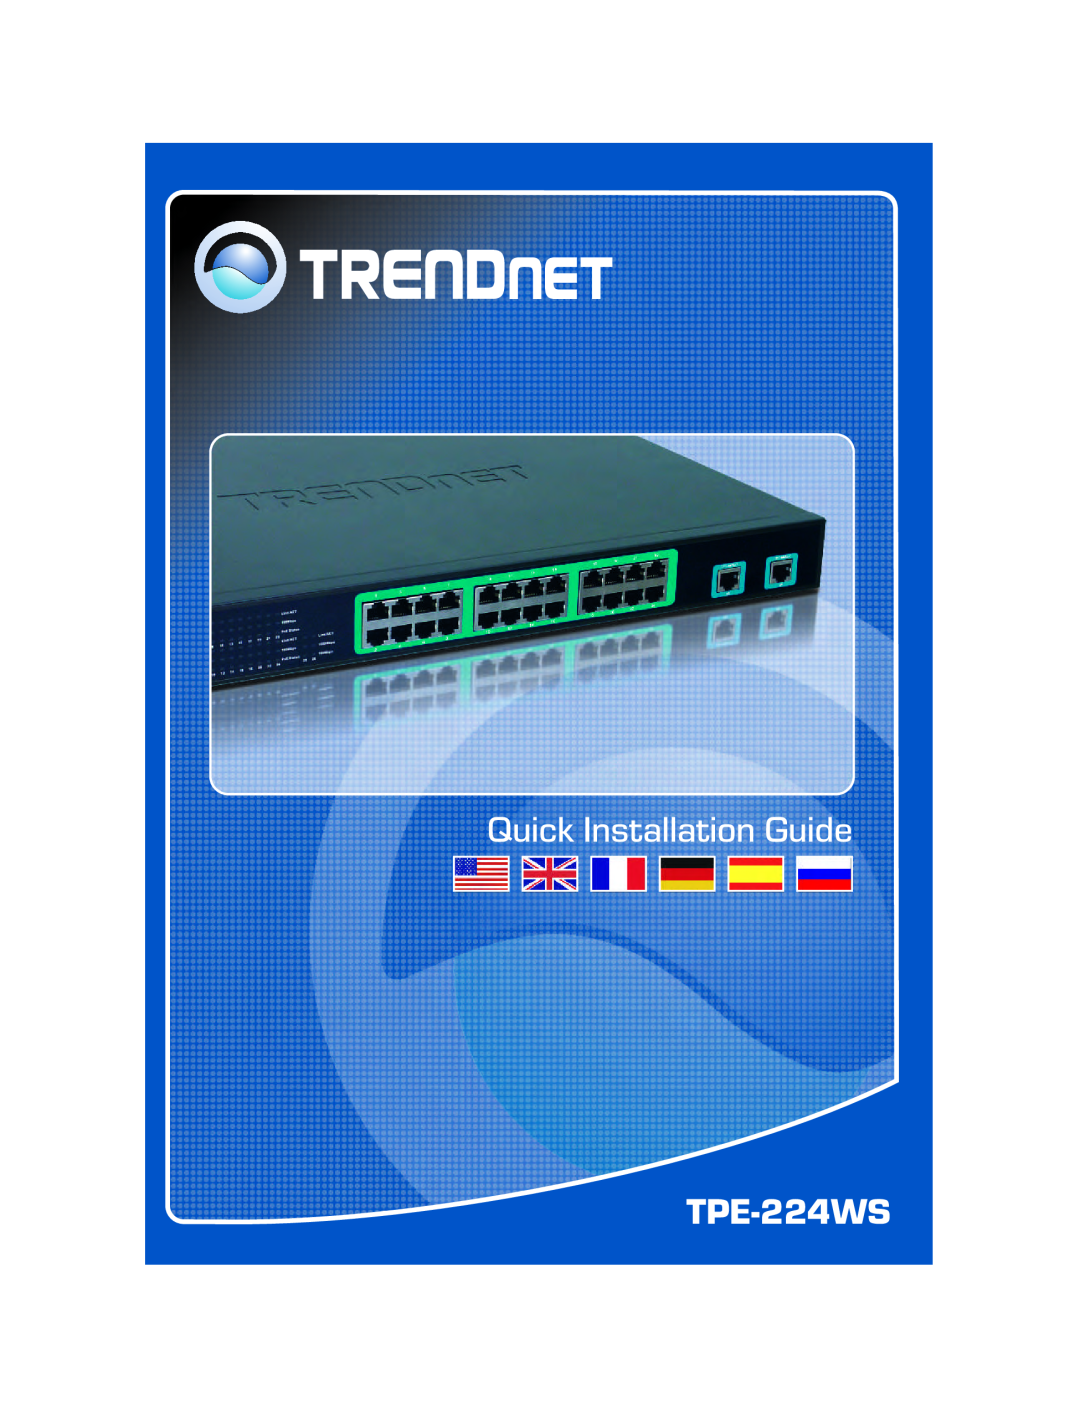 TRENDnet Utility CD-ROM manual Quick Installation Guide, TPE-224WS 